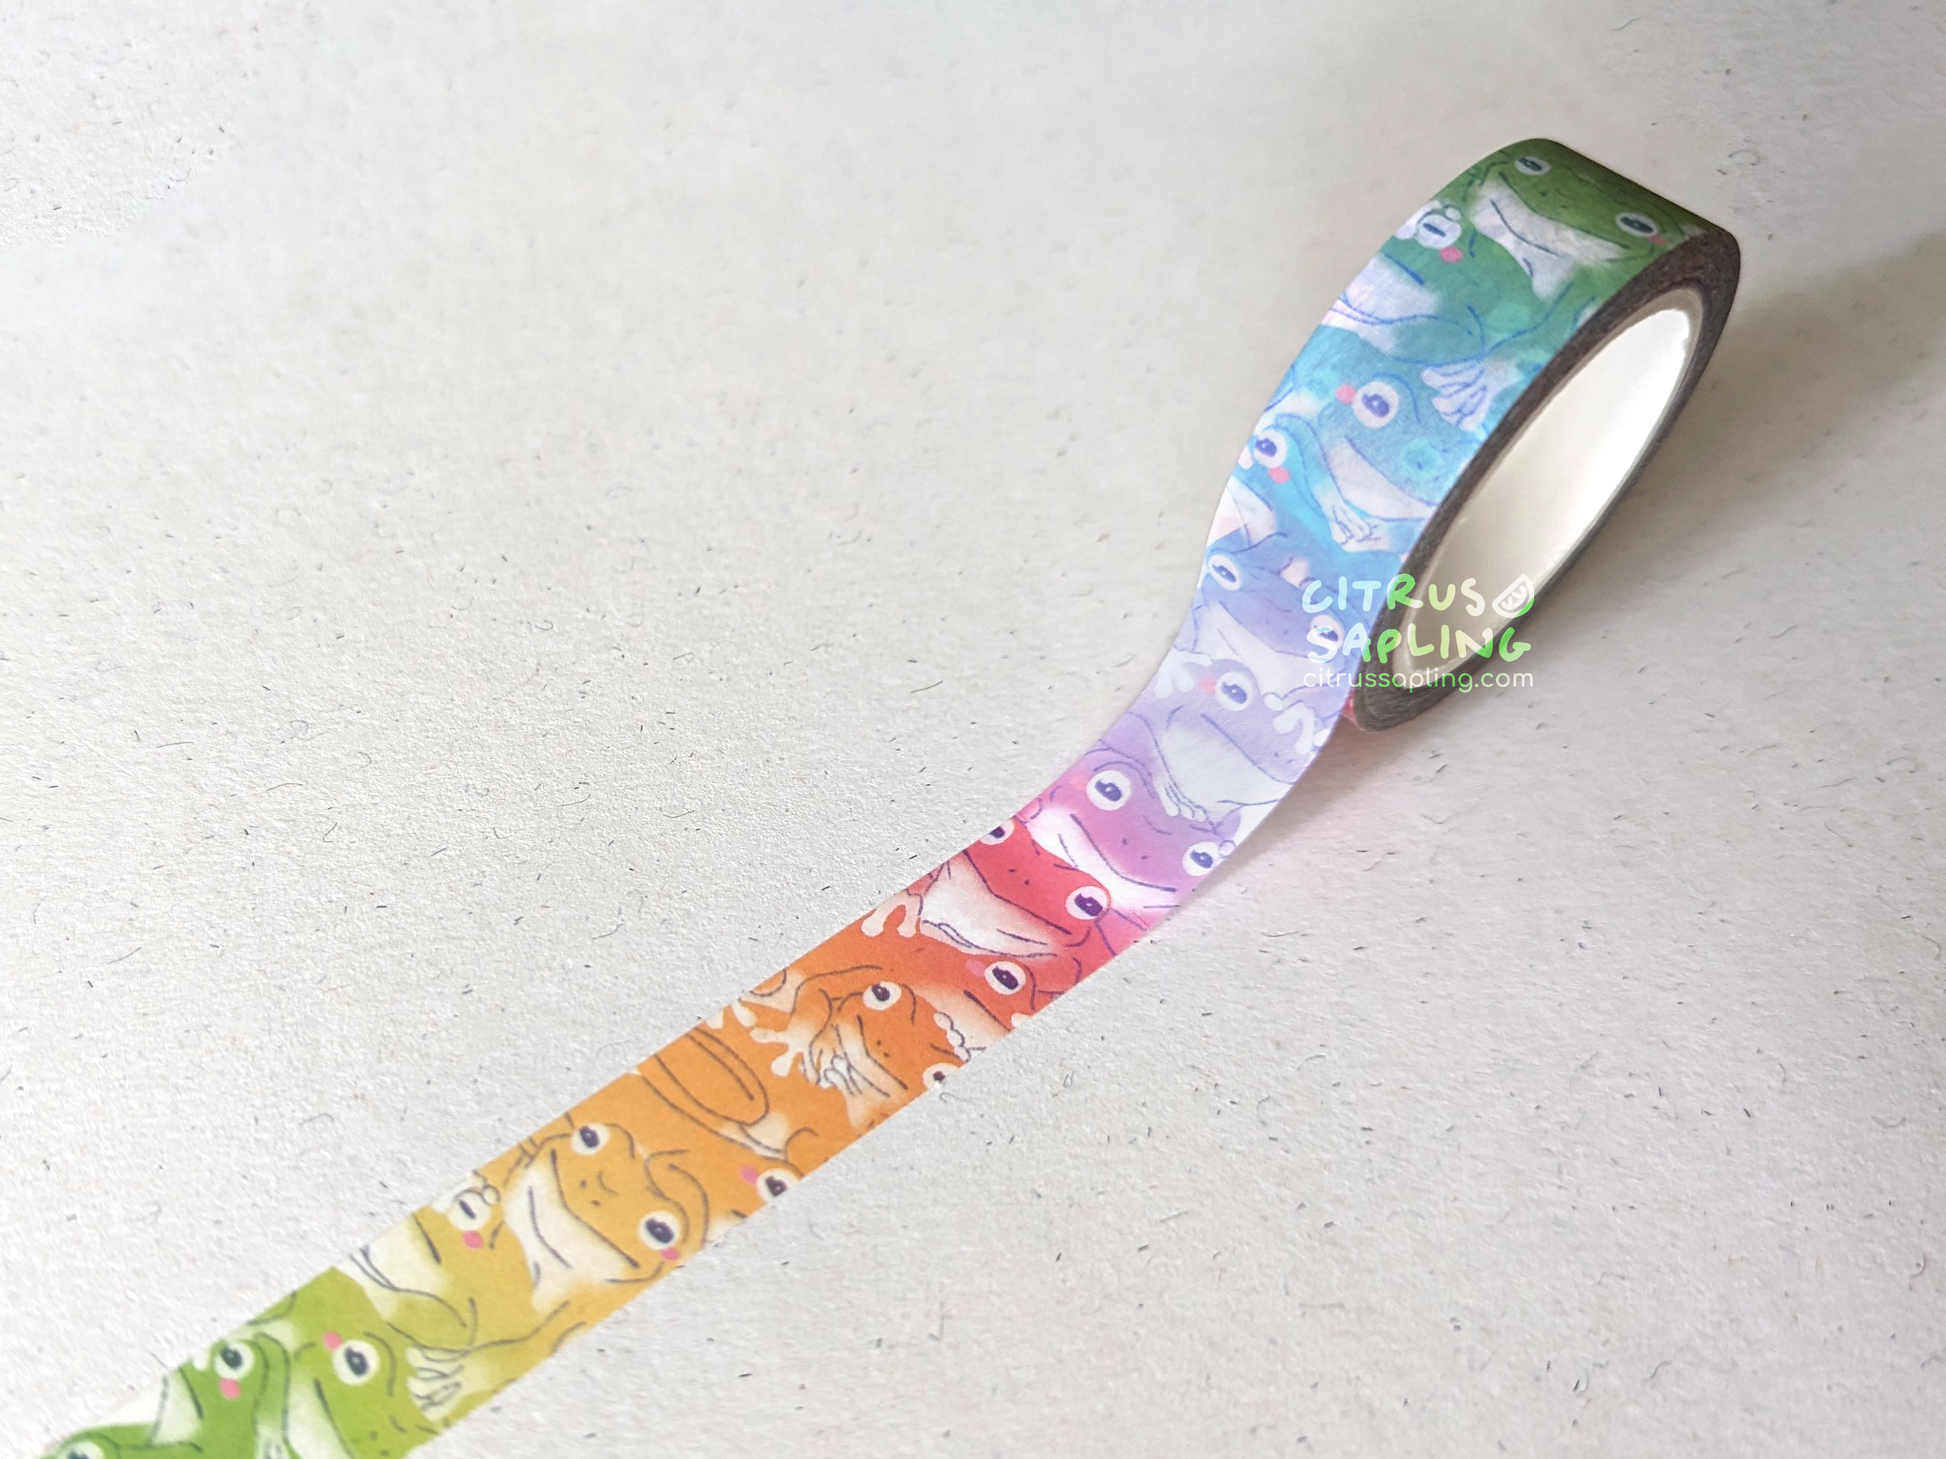 How to make RAINBOW🌈 washi tape at your home _ DIY rainbow washi tape for  journal 